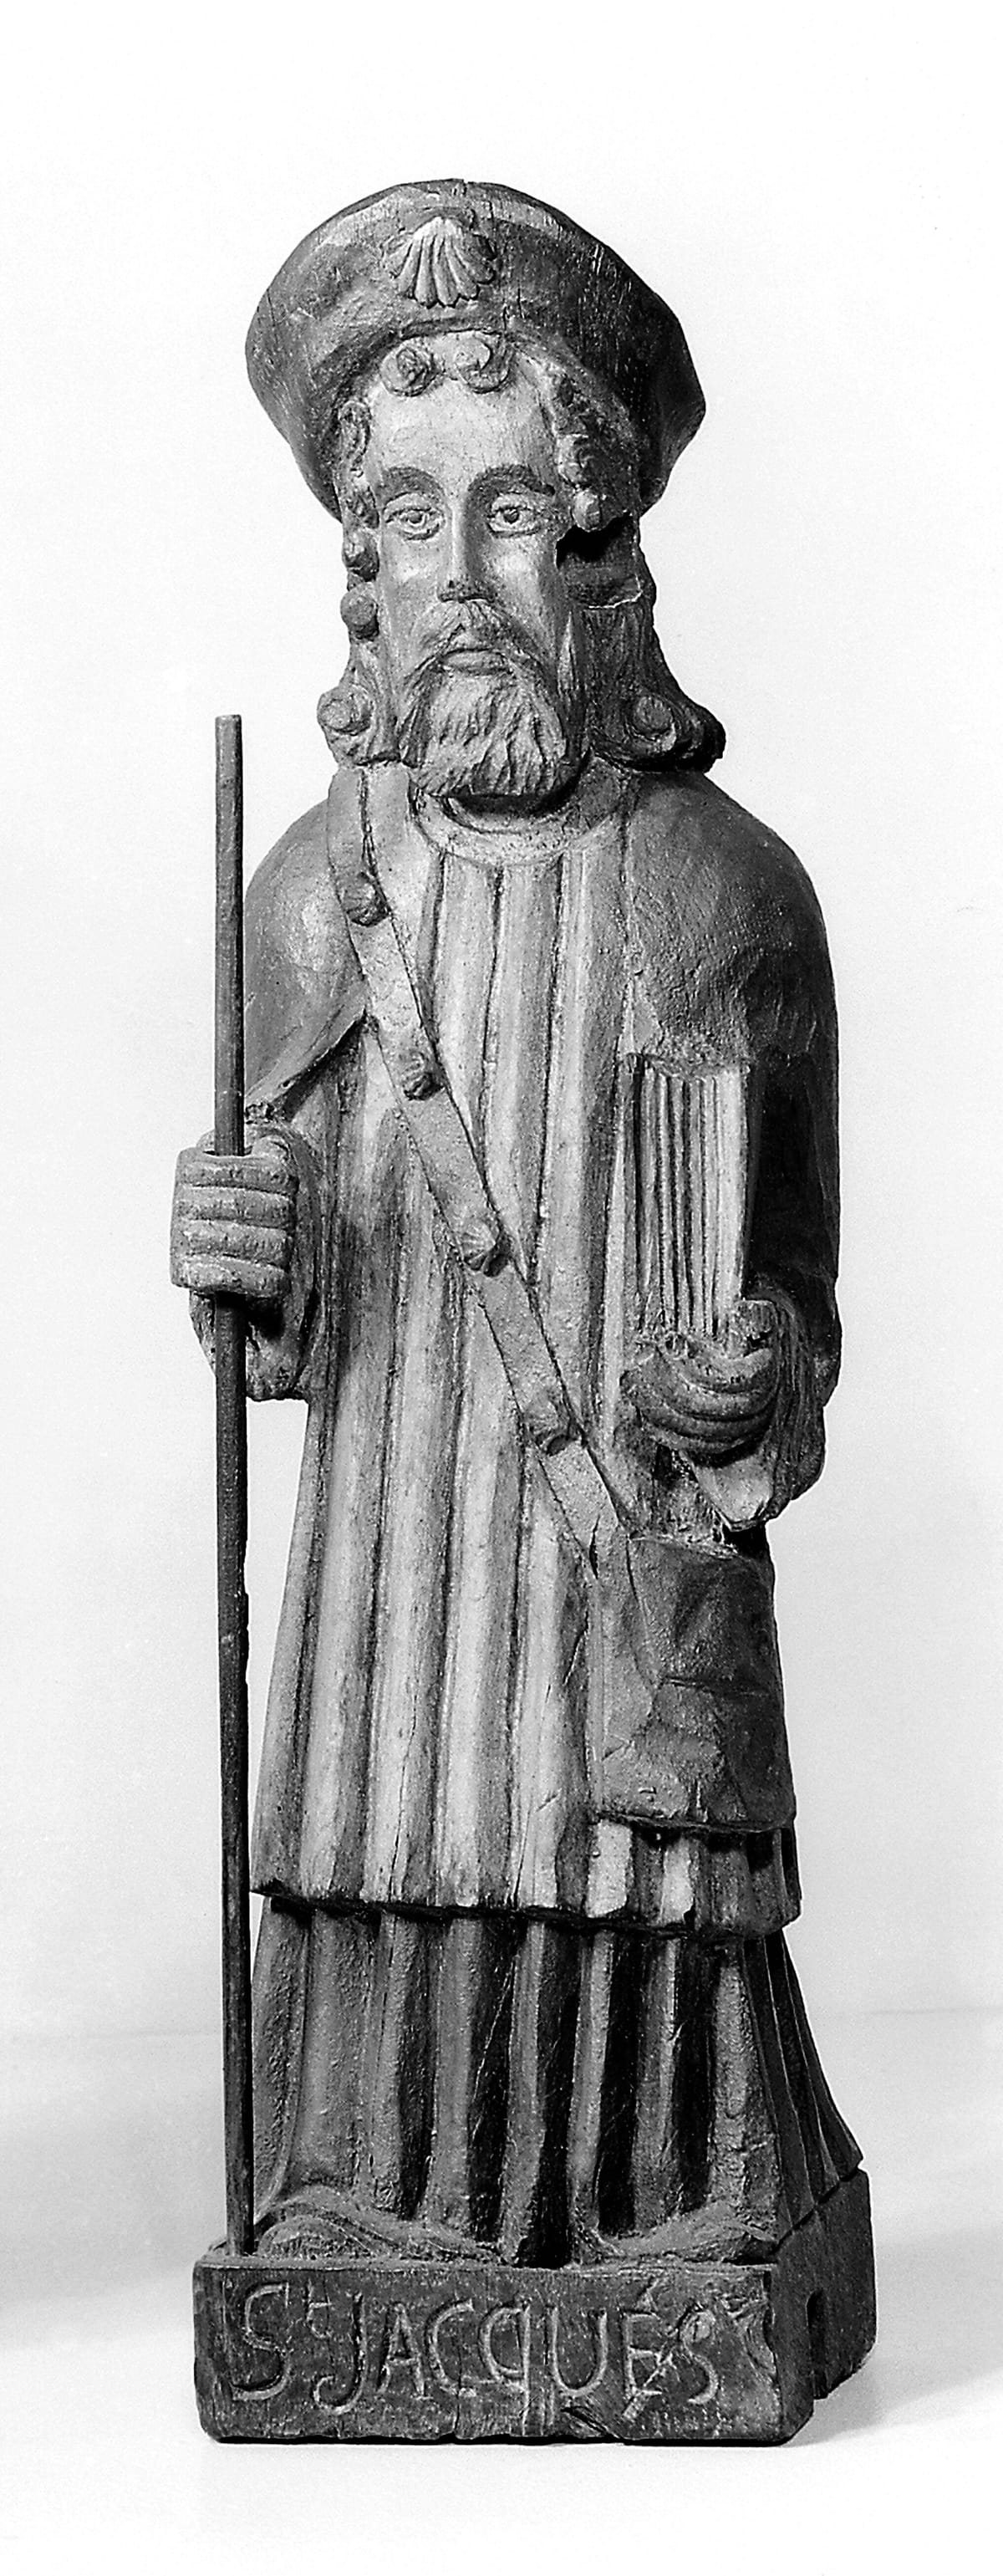 Saint James, Apostle Statue. Represented as a Pilgrim with Scrip and Scallop Shells on His Hat (15-16th century) - Catholic Stock Photo